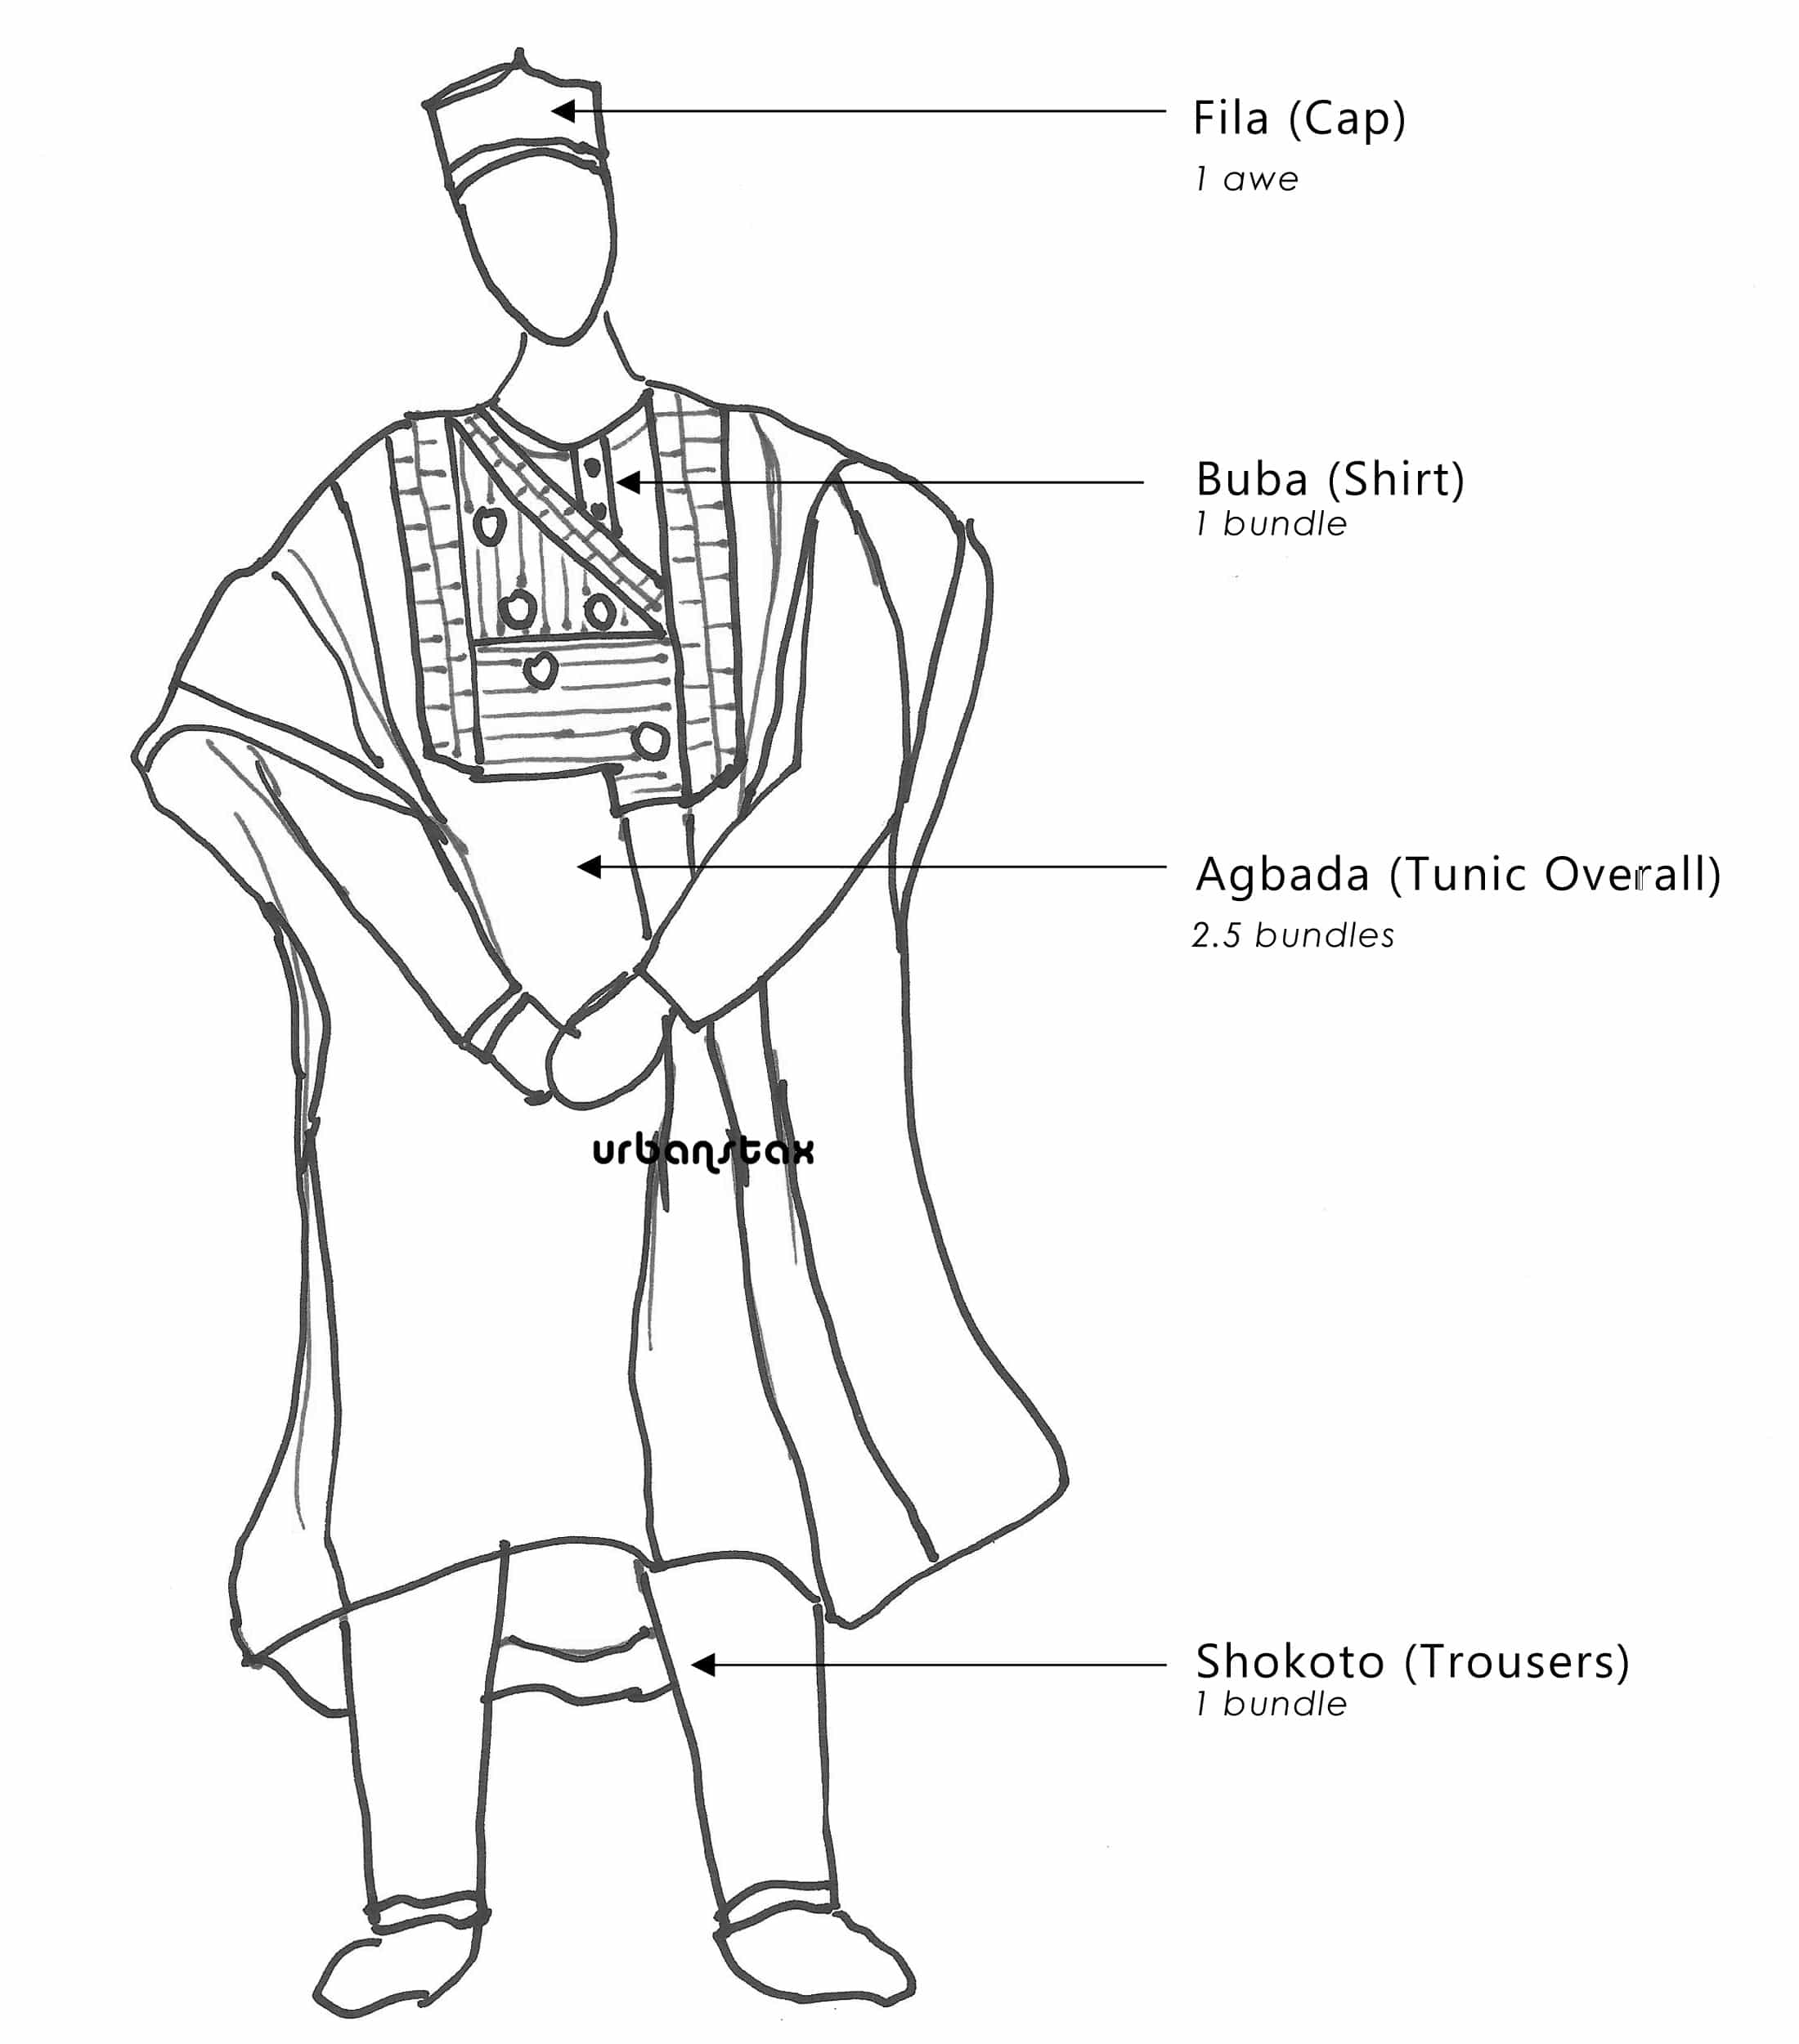 Diagram of traditional Yoruba Outfit for men